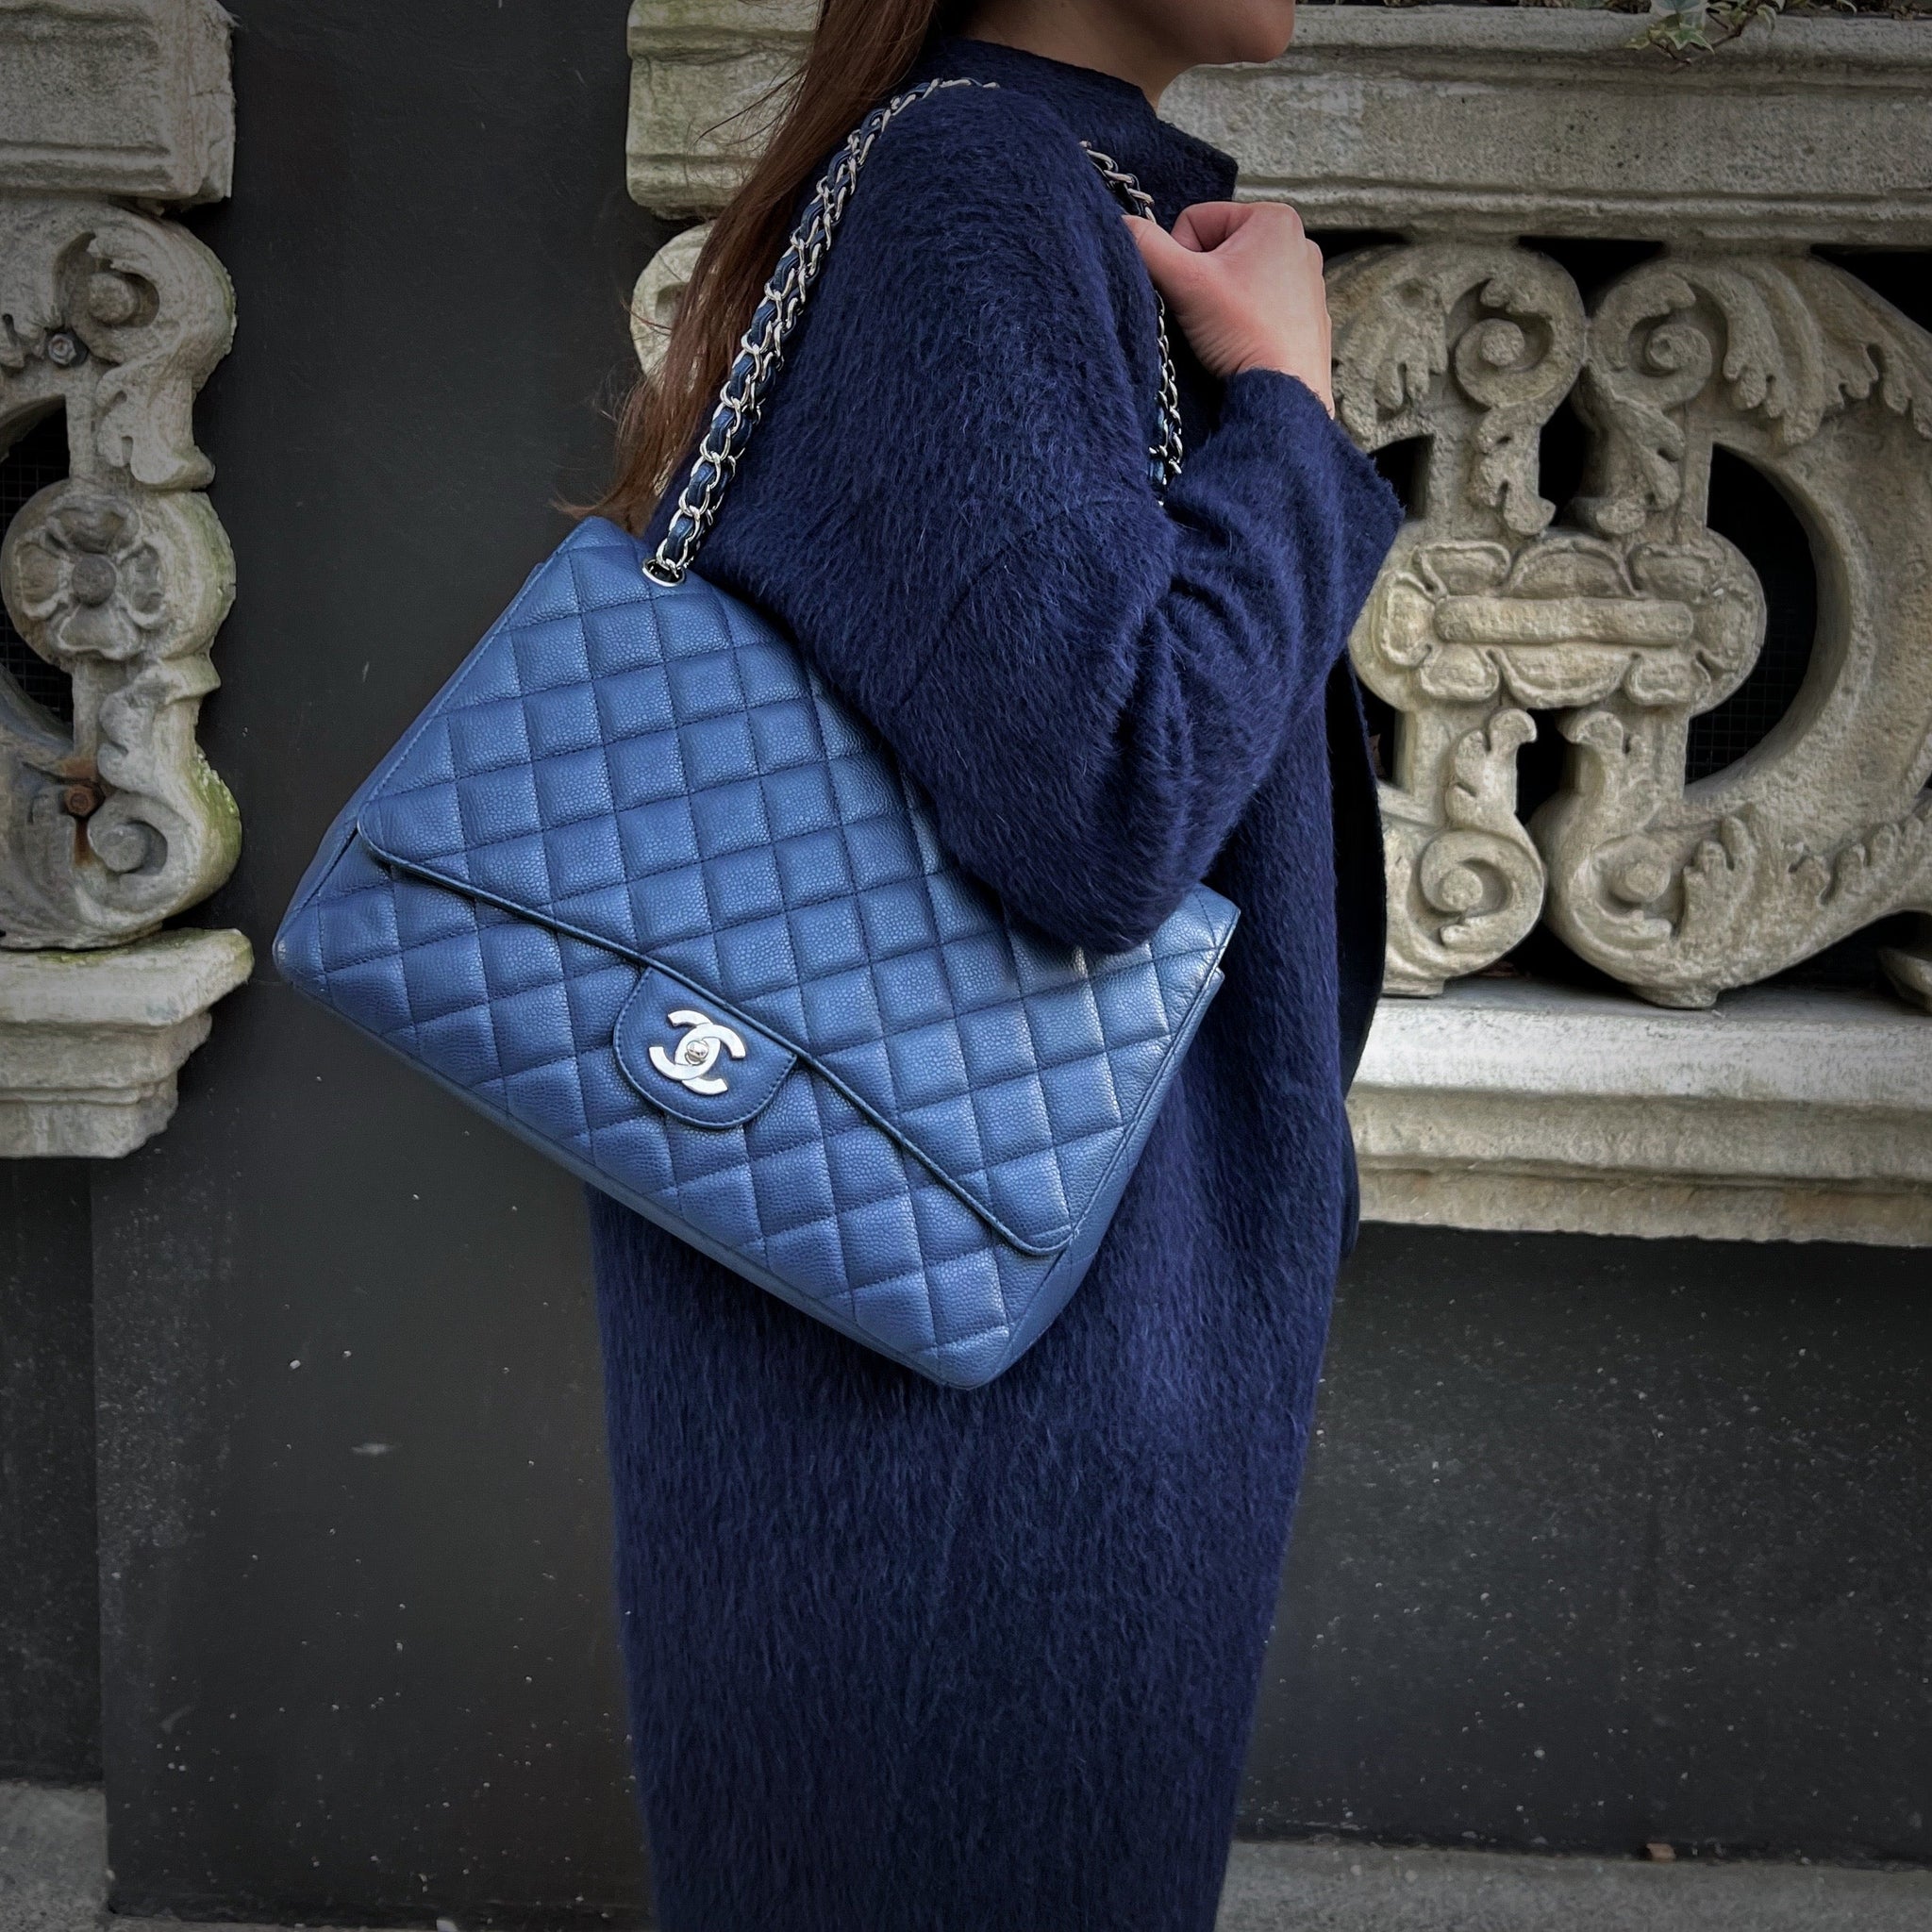 Chanel Blue Perforated Easy Flap Jumbo Bag – The Closet